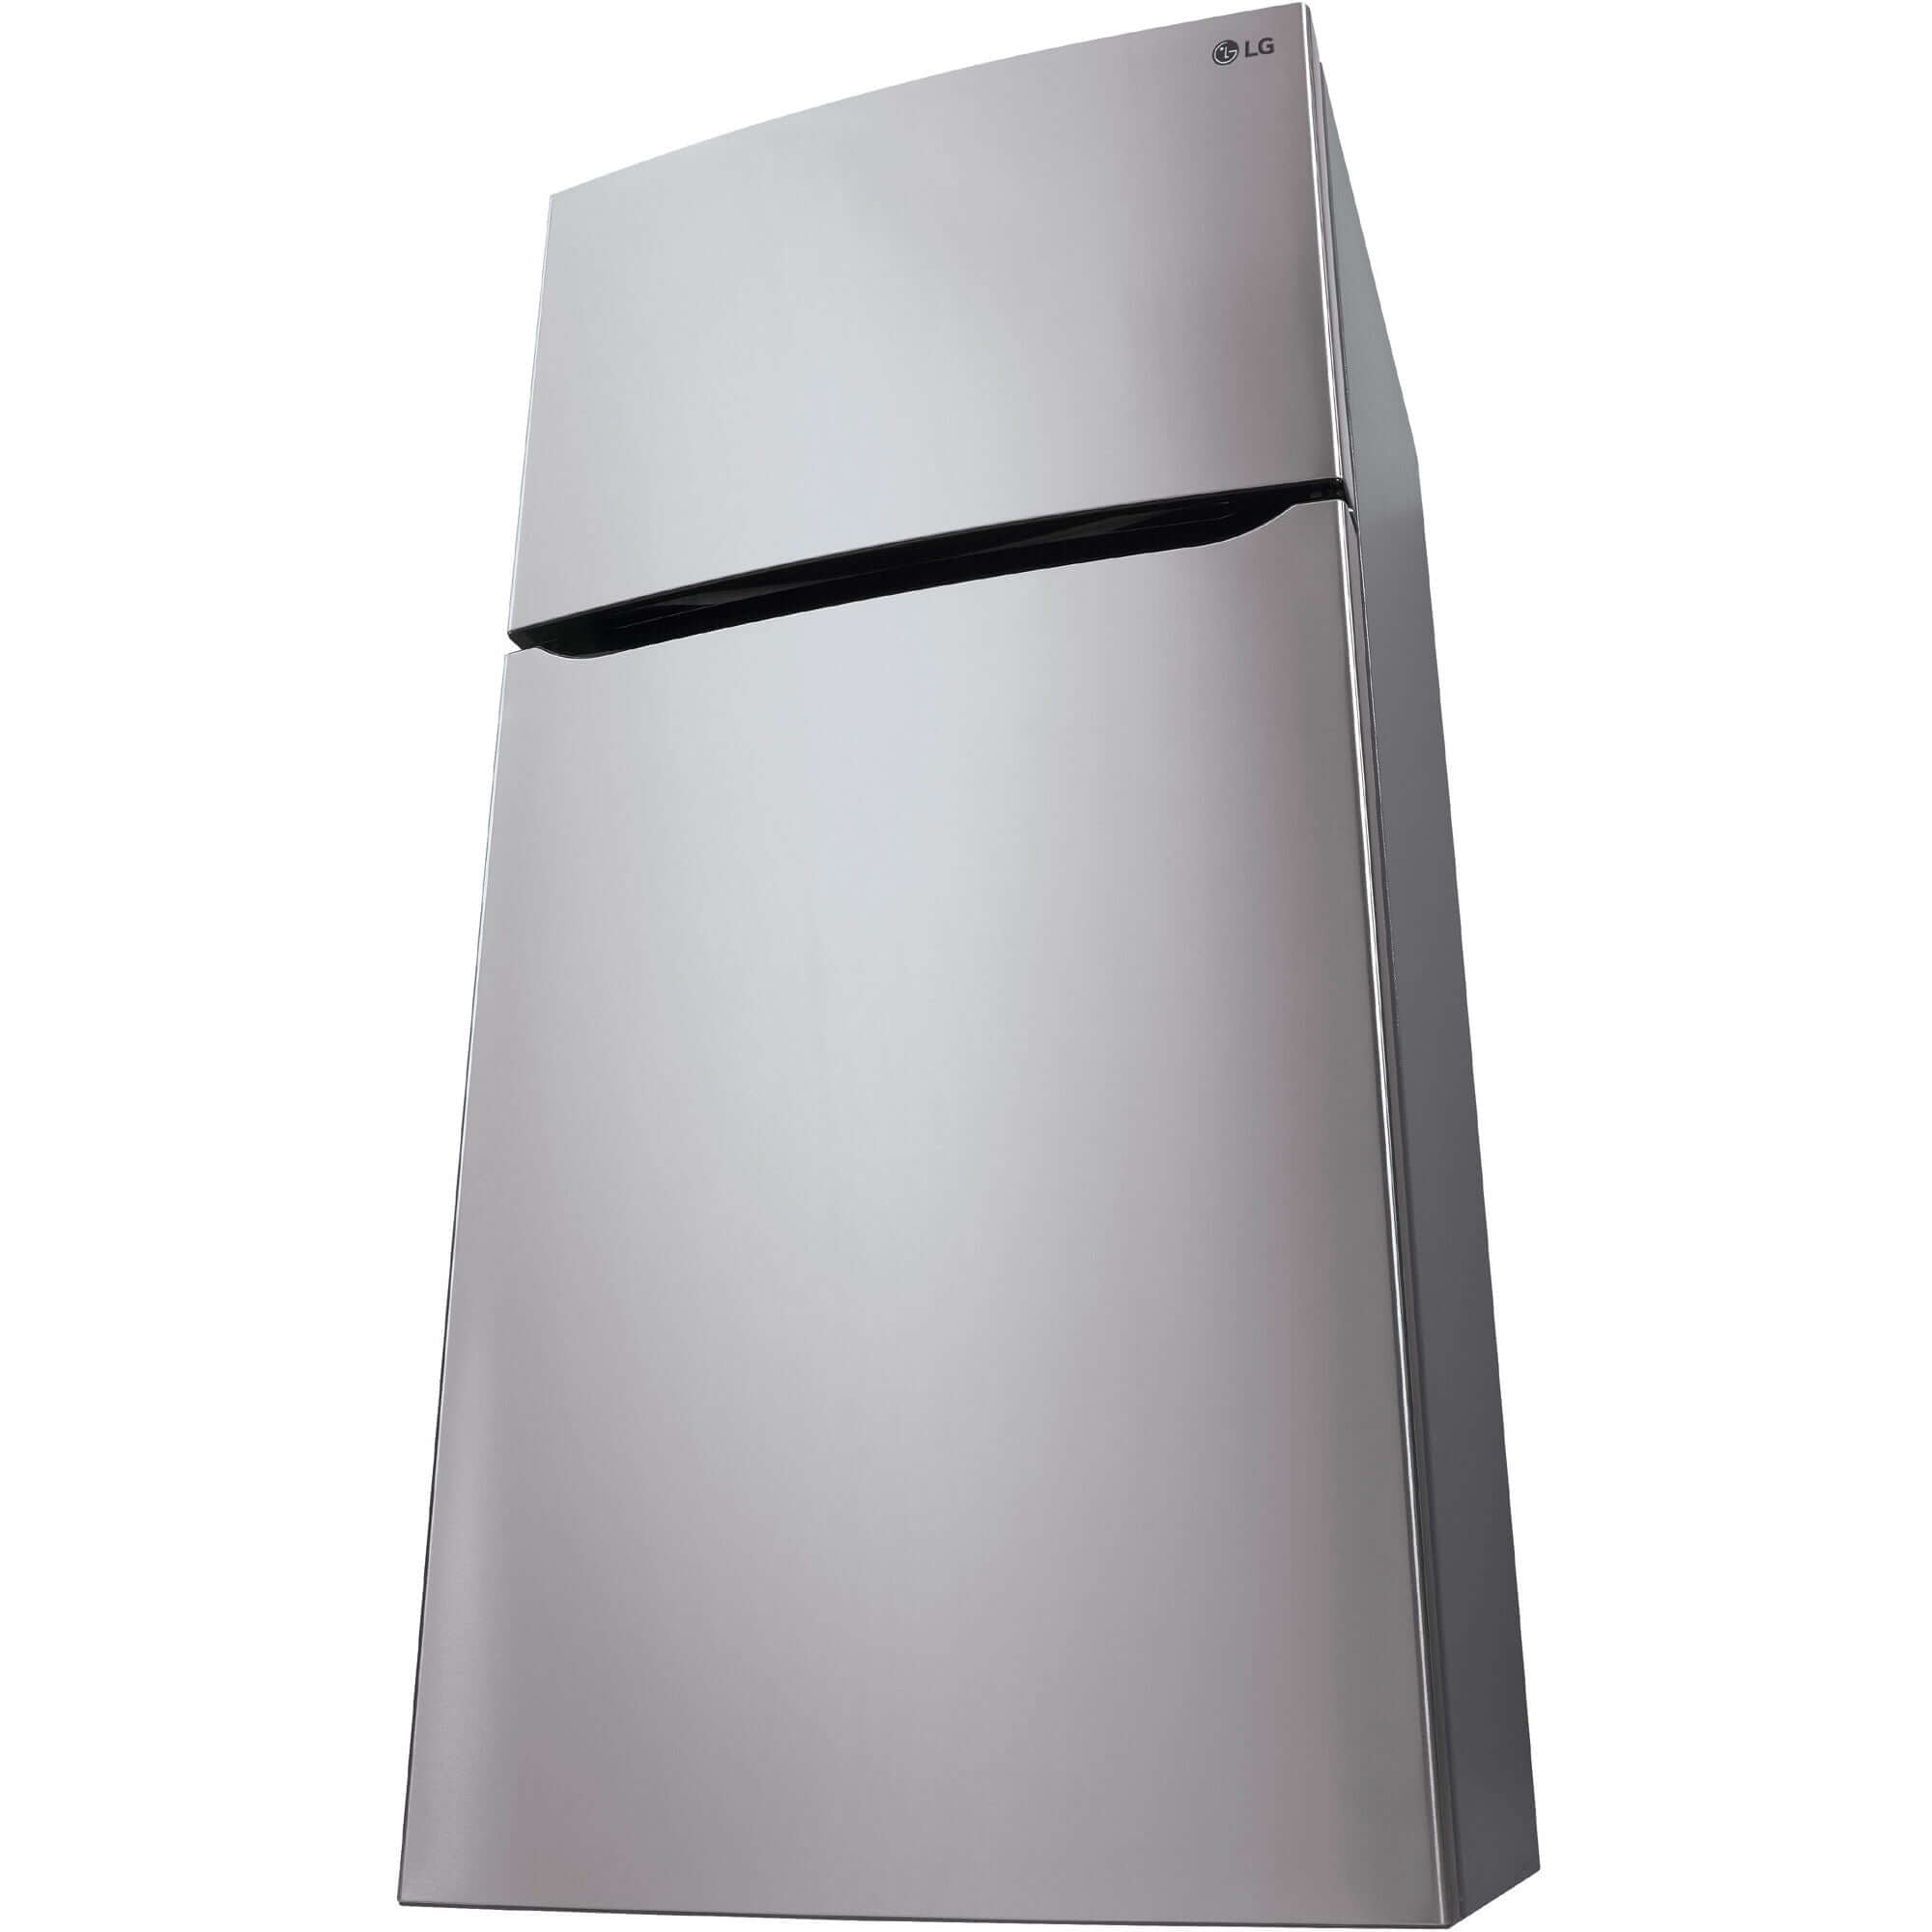 LG 30 Inch Refrigerator with Top-Mount Freezer in Stainless Steel 20 Cu. Ft. (LTCS20030S)